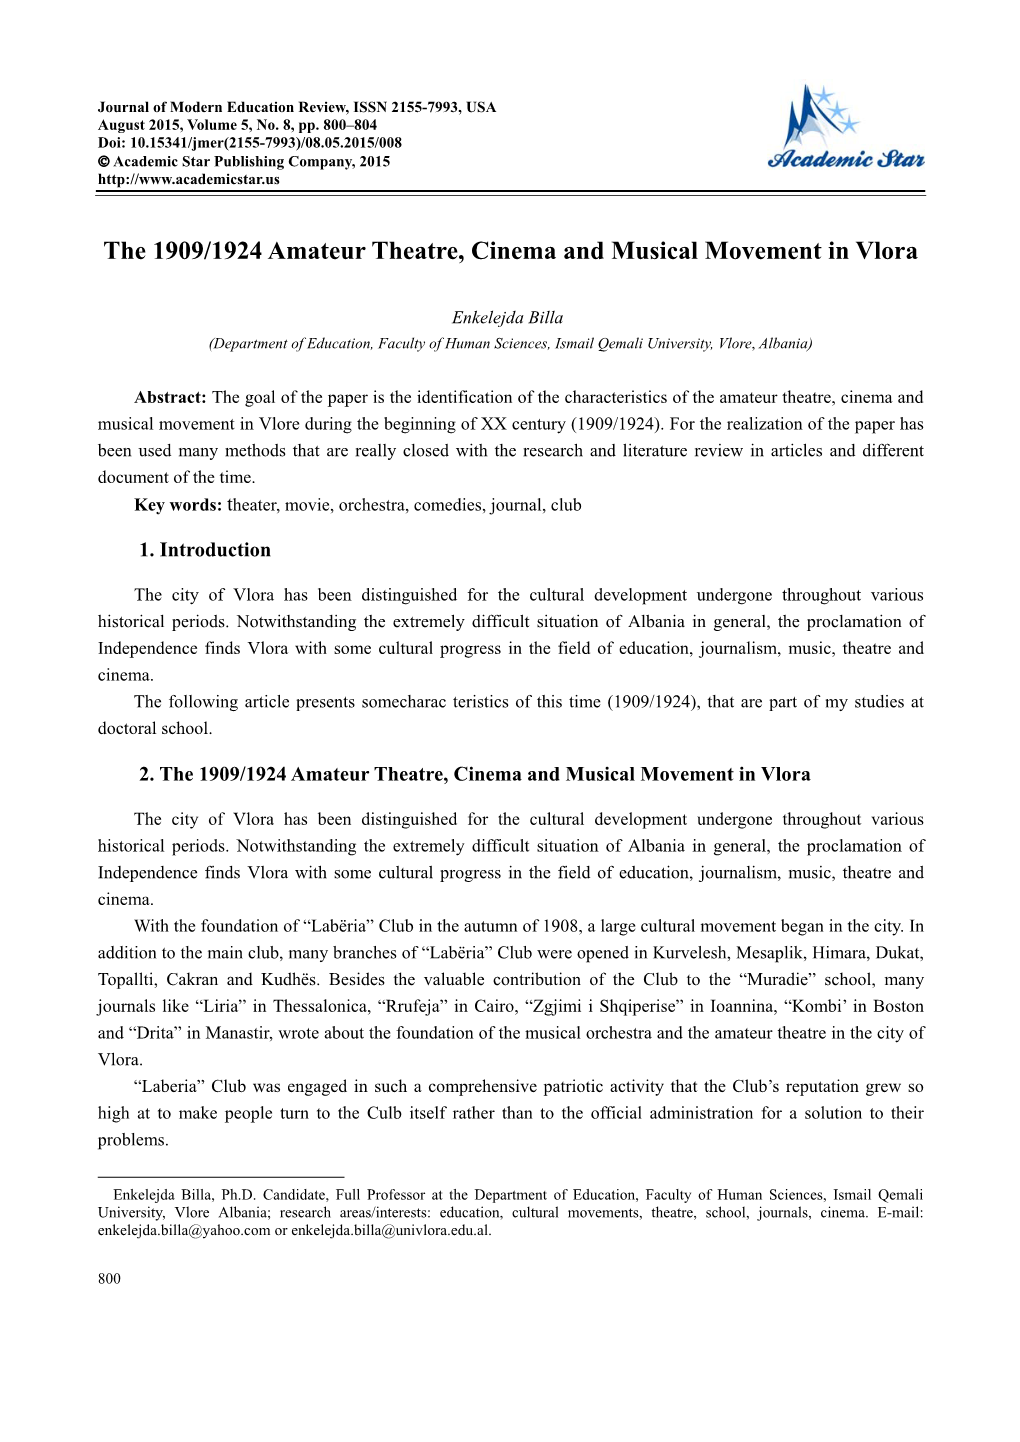 The 1909/1924 Amateur Theatre, Cinema and Musical Movement in Vlora